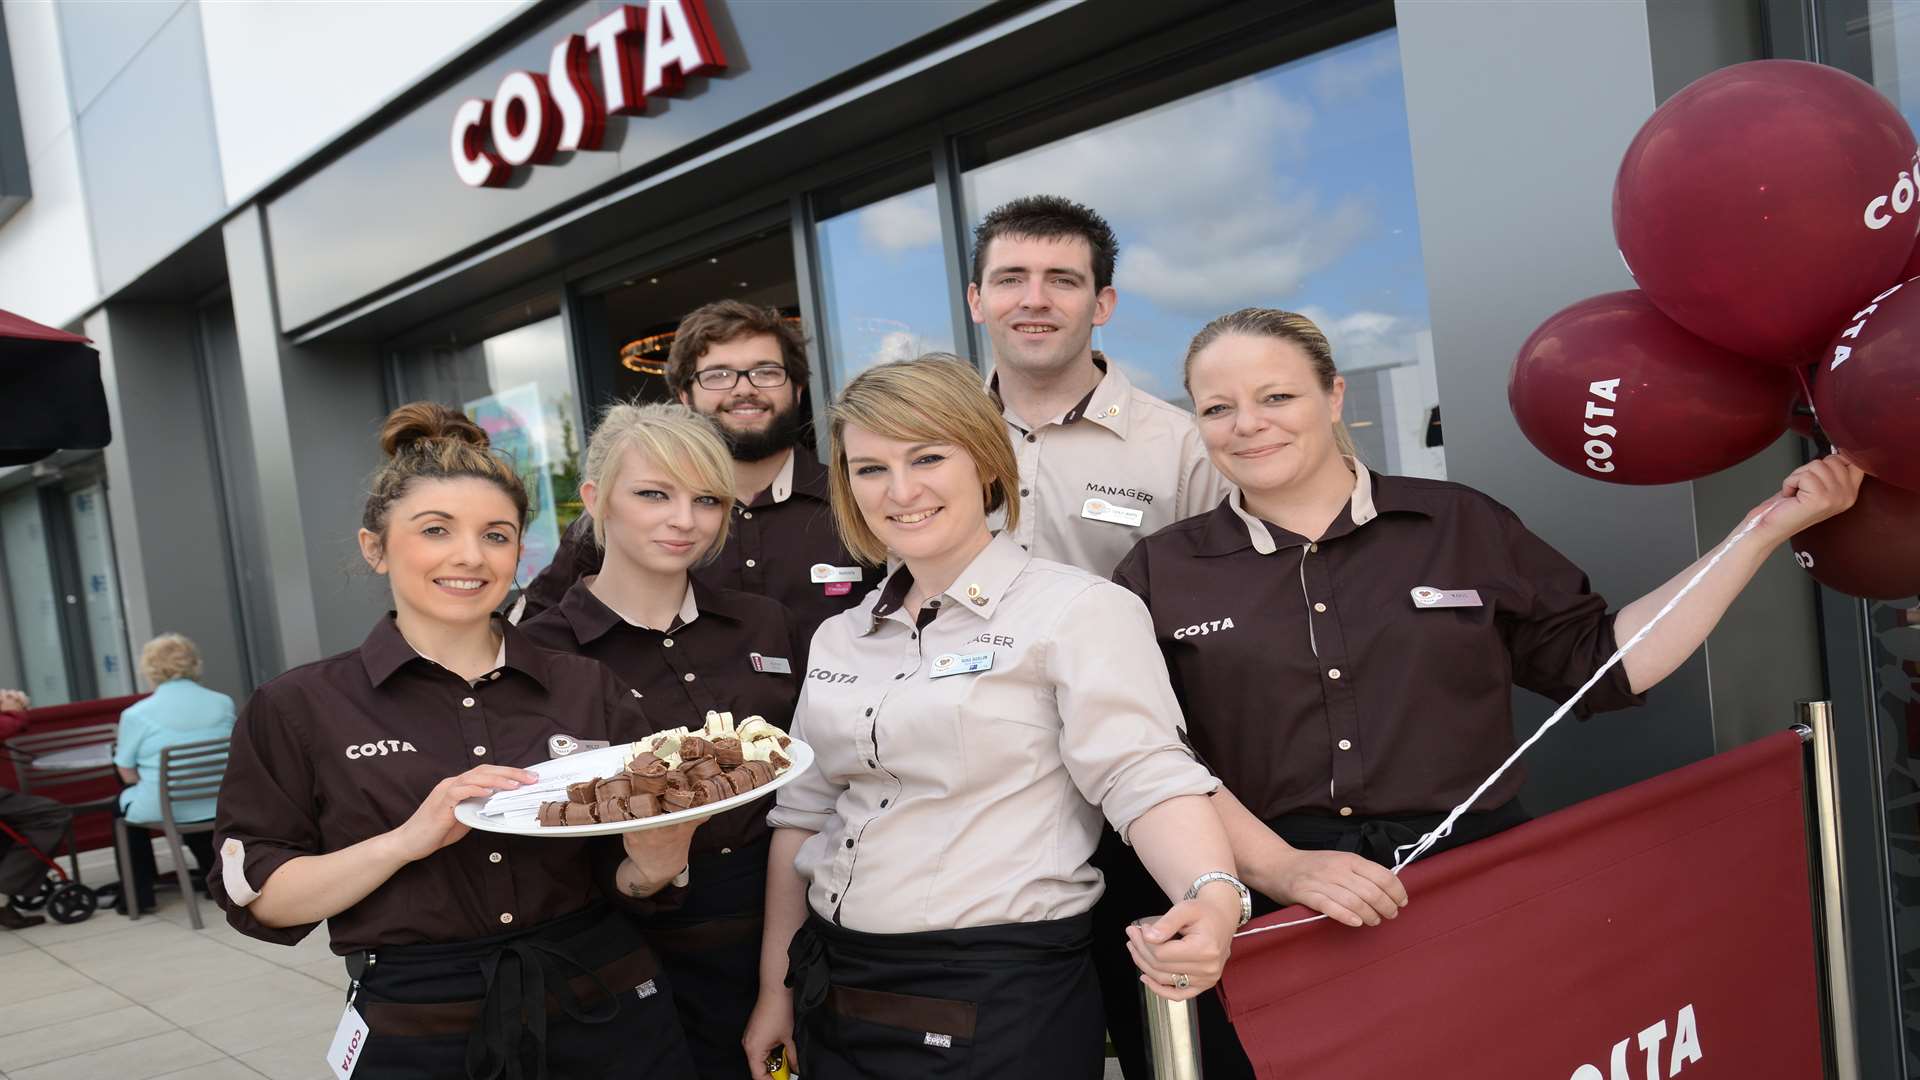 Manager Rosa Barlow and staff celebrate the opening of Costa at Sevington Retail park.